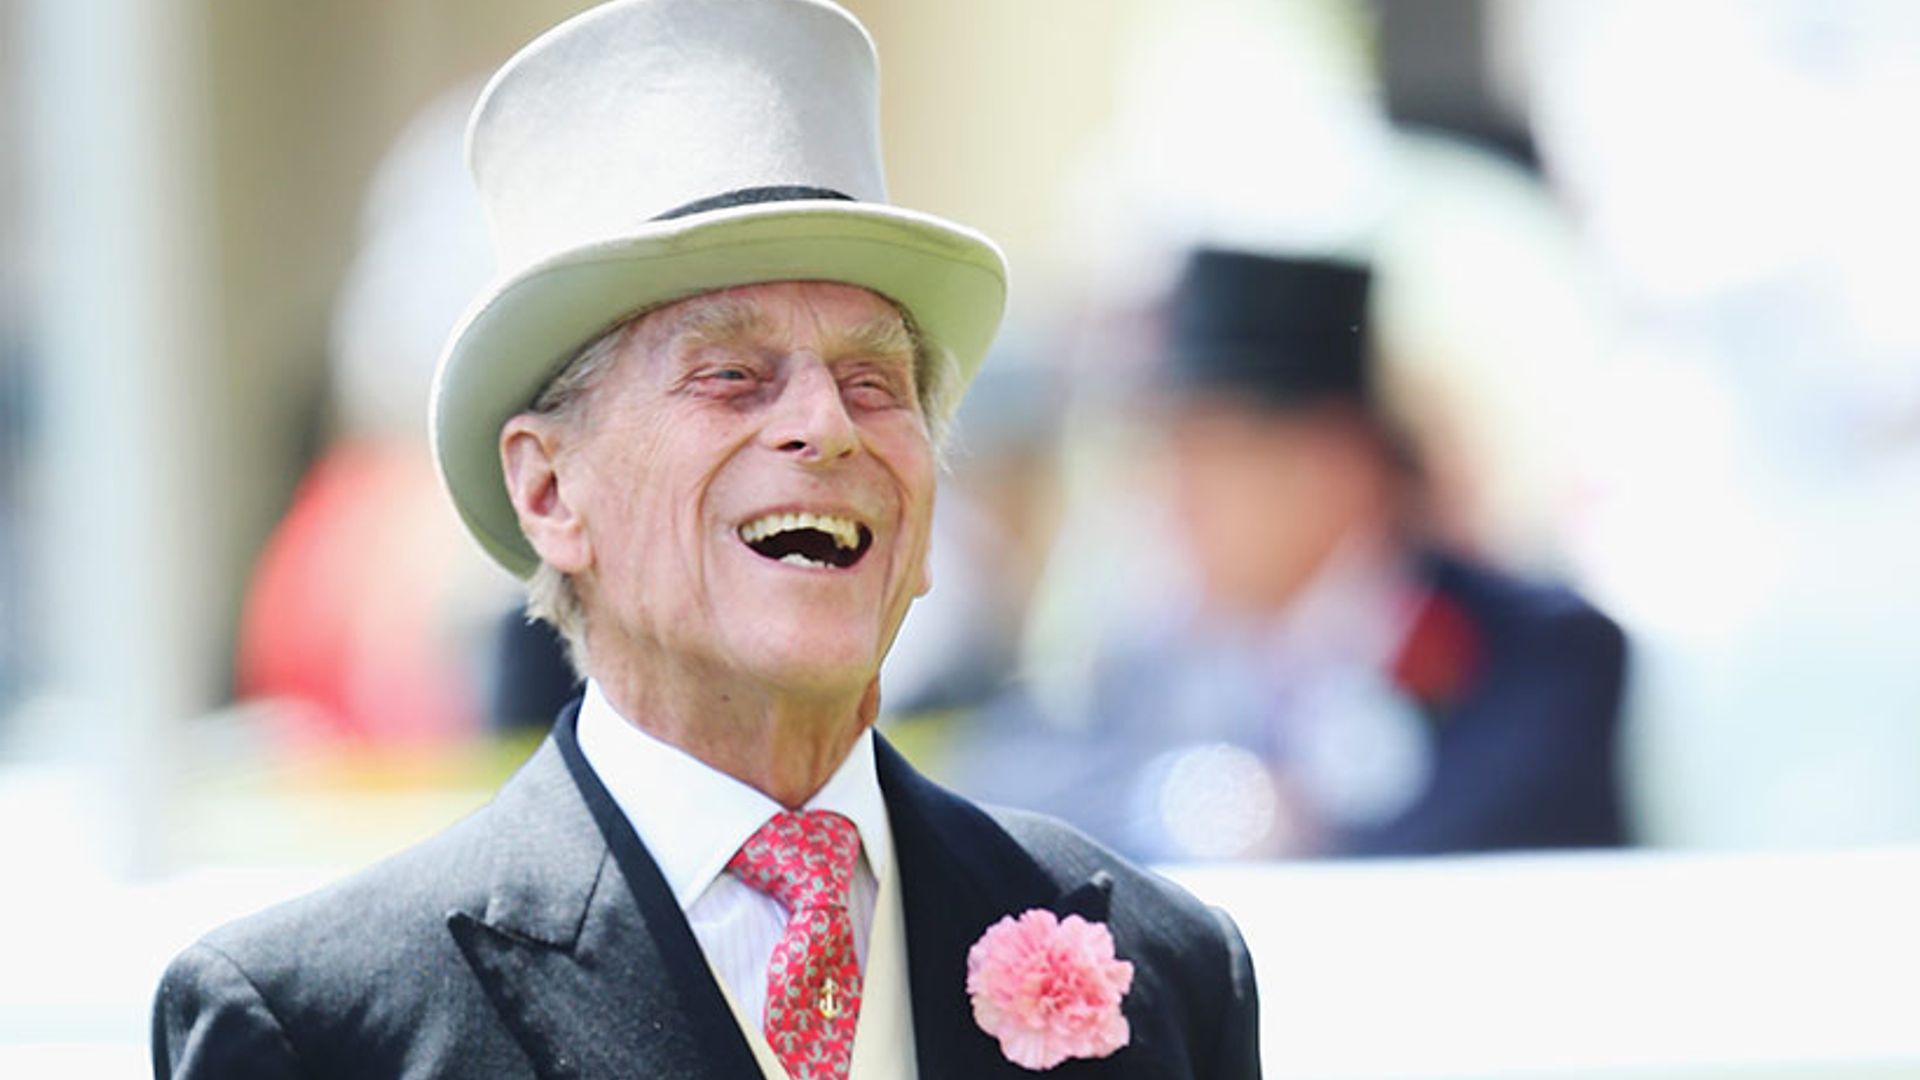 Prince Philip, 96, admitted to hospital with an infection 